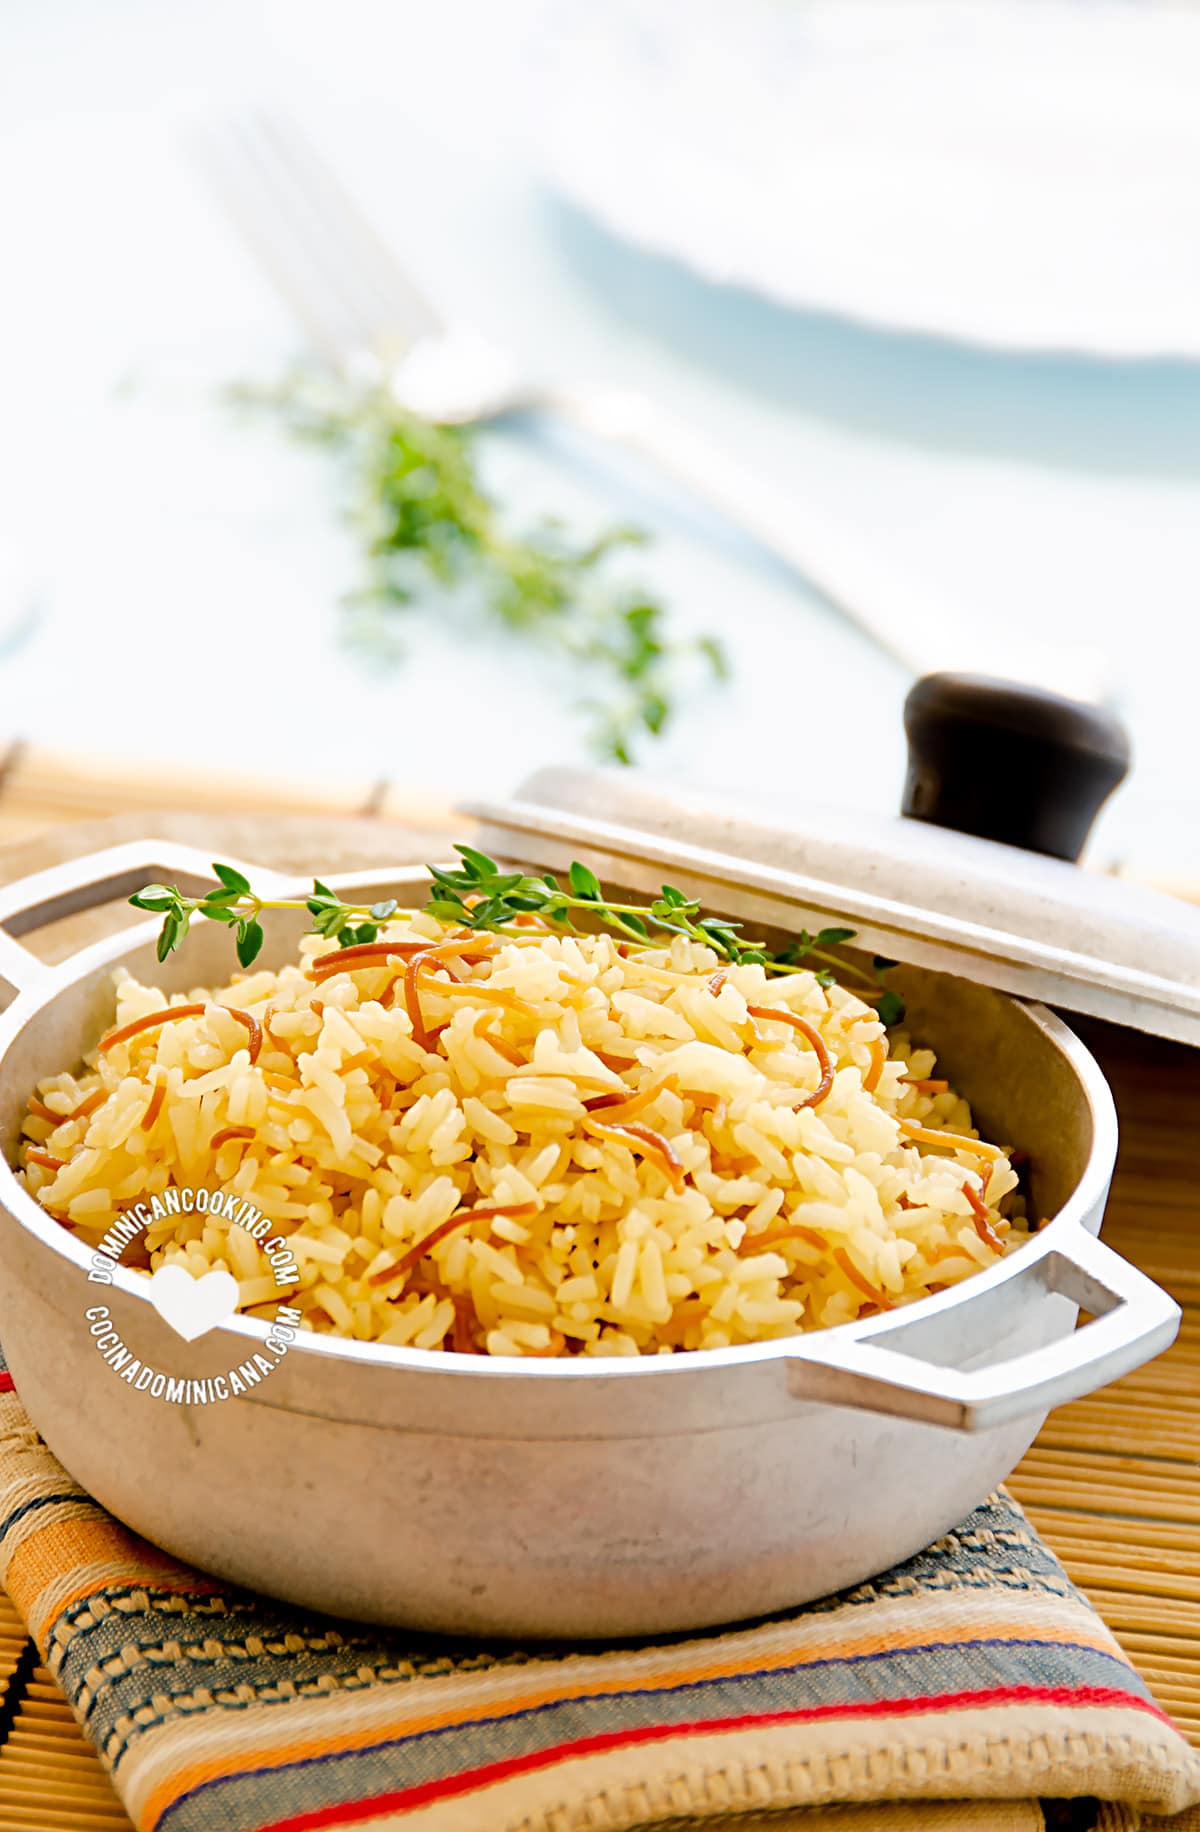 Arroz con fideos (rice and fried noodles).